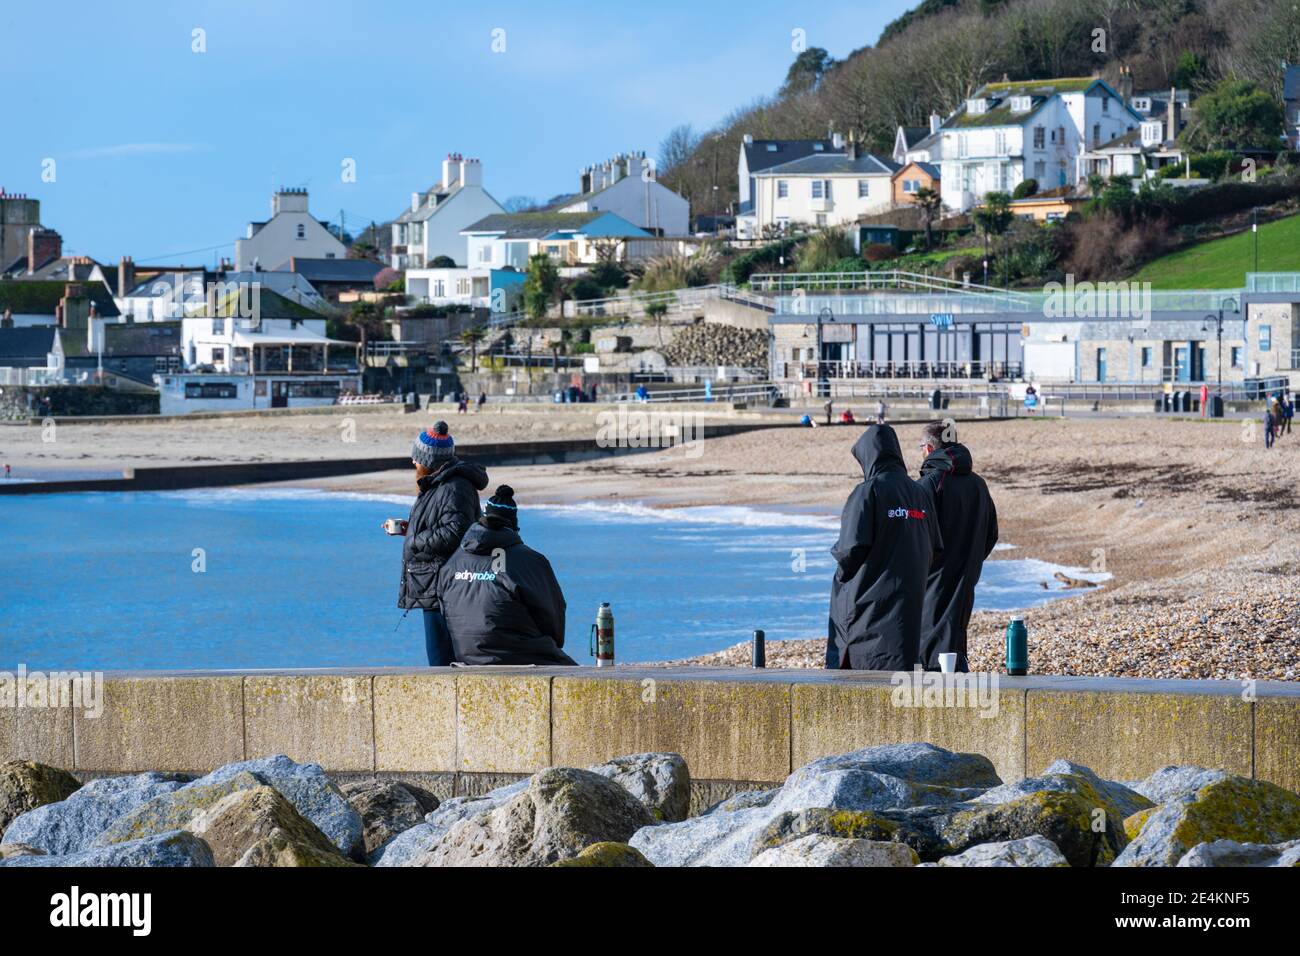 Lyme Regis, Dorset, UK. 24th January 2021. UK Weather: A bright, sunny and cold day at the seaside resort town of Lyme Regis.  Locals enjoy flask of coffee on the almost deserted beach during the third national lockdown. Credit: Celia McMahon/Alamy Live News. Stock Photo